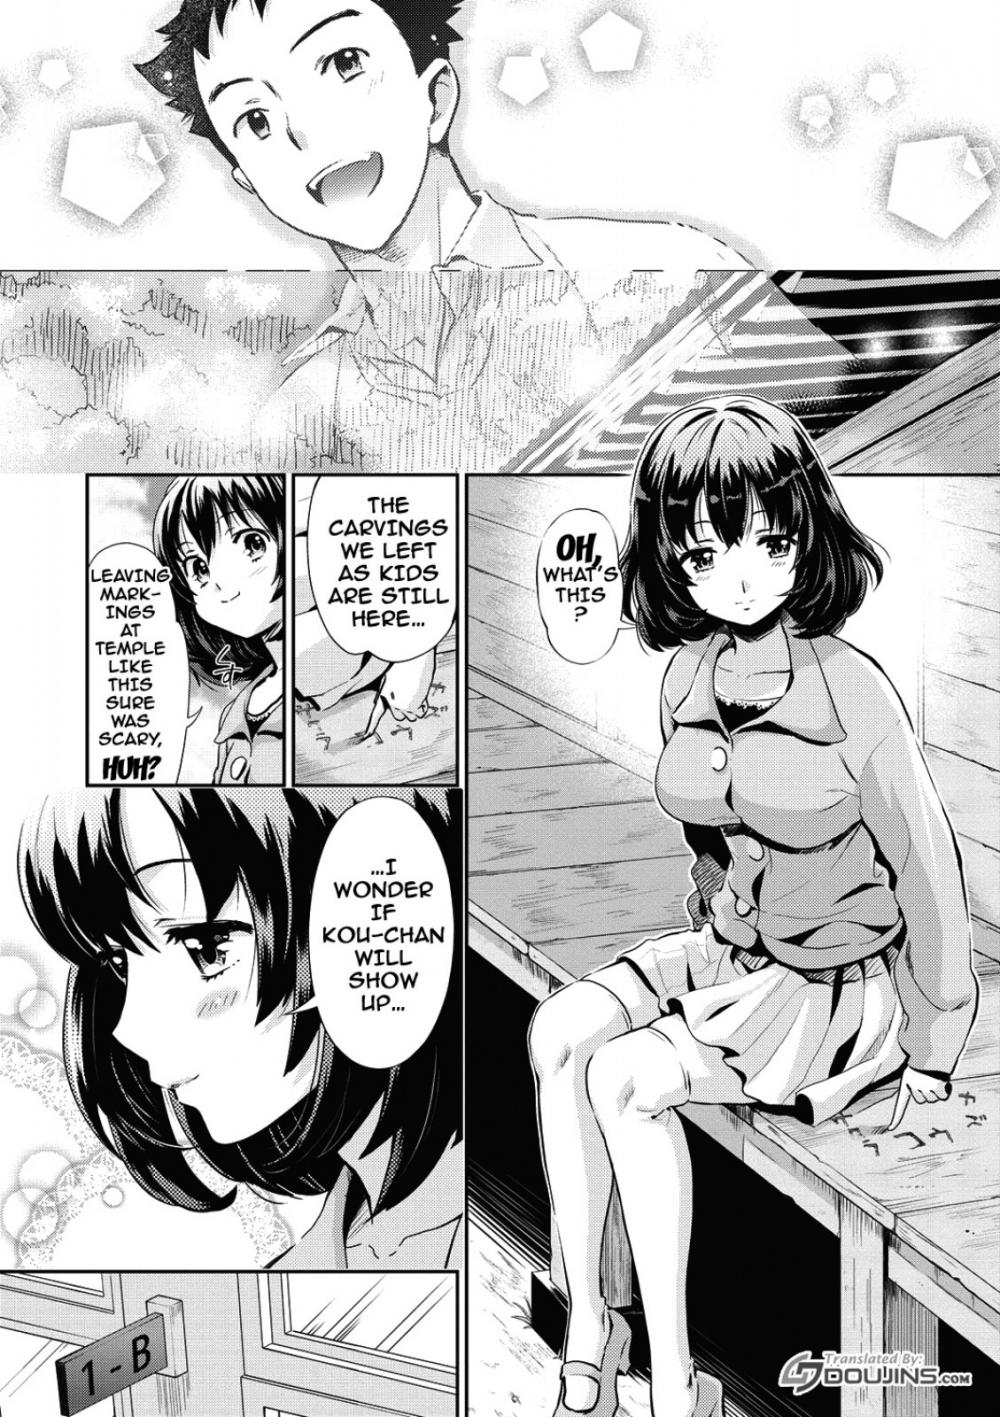 Hentai Manga Comic-From Now On She'll Be Doing NTR-Chapter 6-2